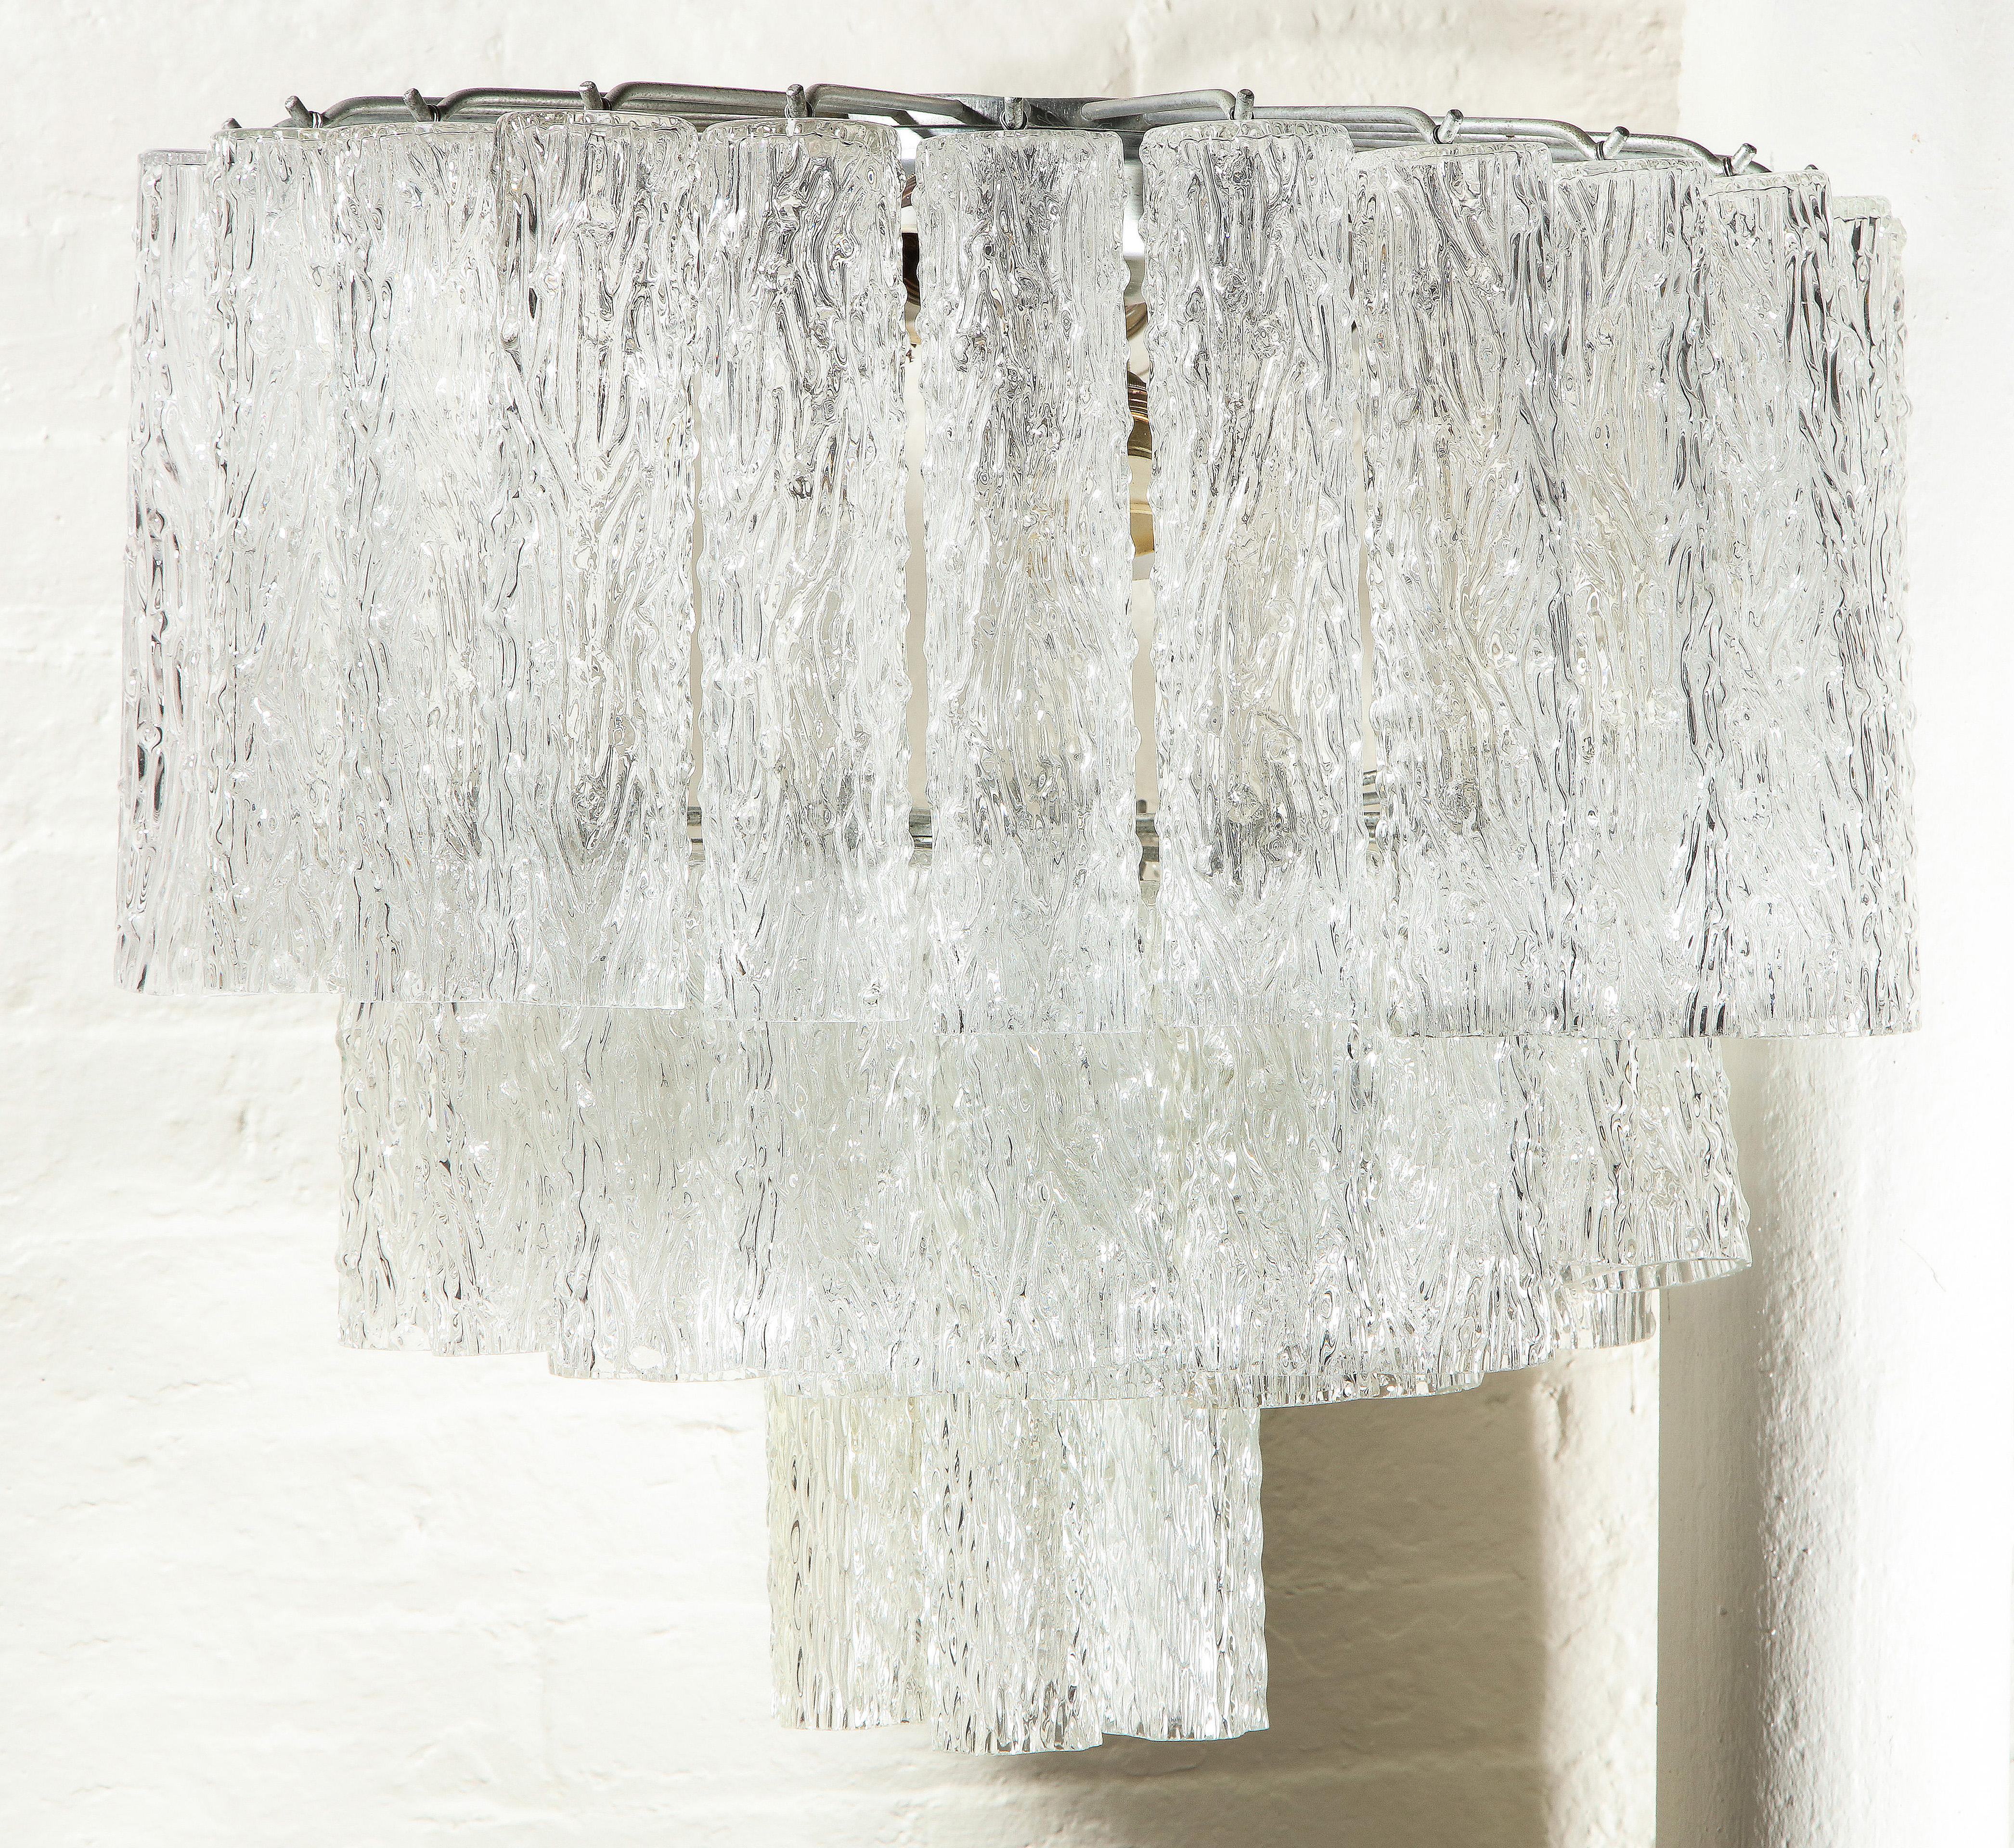 3-tier Doria tube chandelier, midcentury, Germany
Beautiful glamorous accent to any decor.3 tiers and solid glass. Each tube is hung on a separate metal piece on the wiring of the chandelier.
  